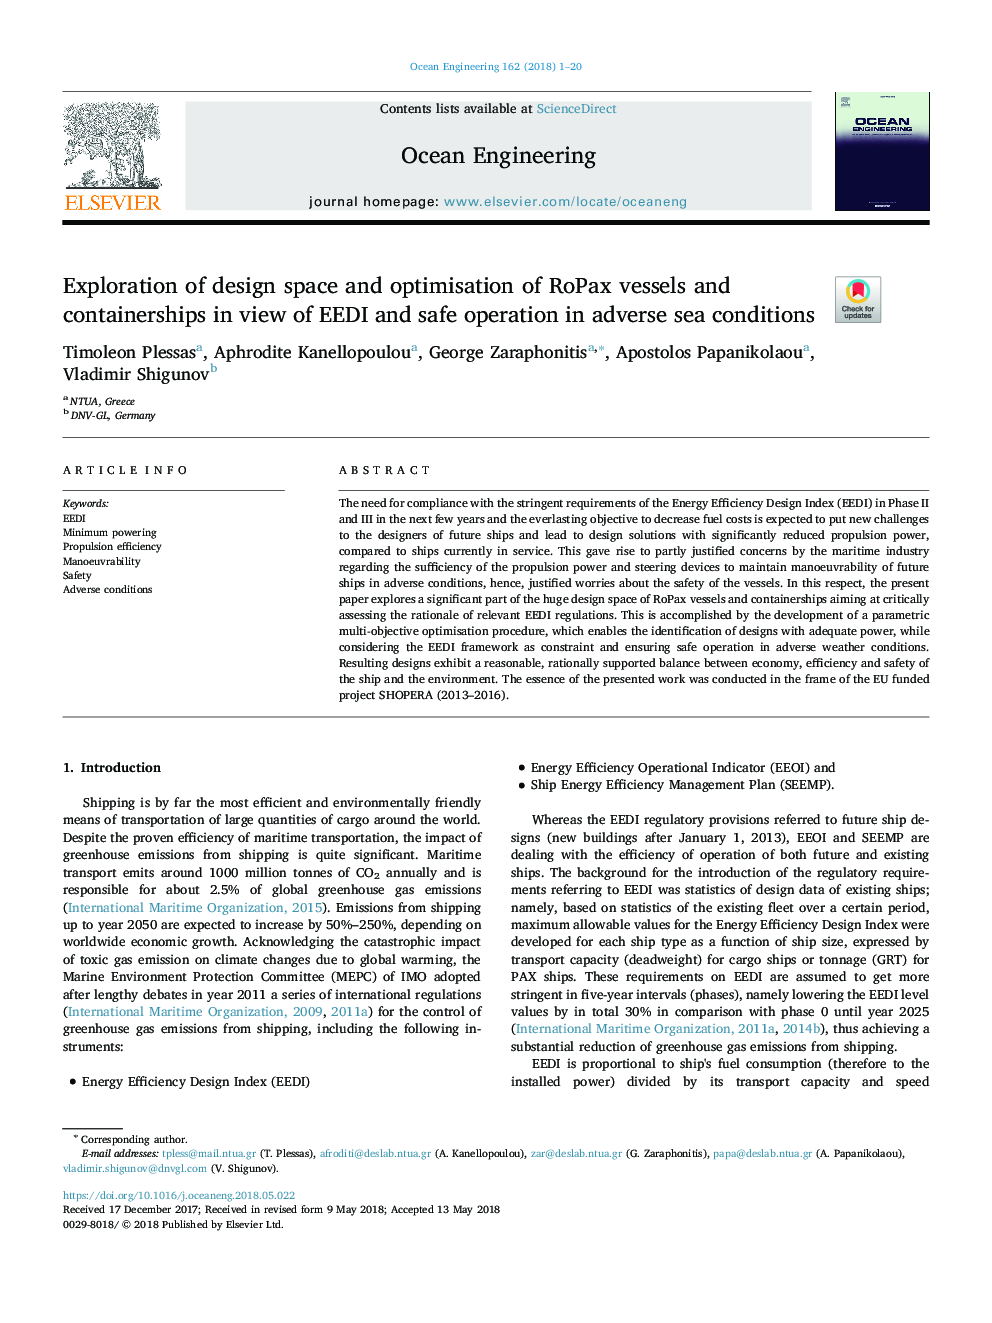 Exploration of design space and optimisation of RoPax vessels and containerships in view of EEDI and safe operation in adverse sea conditions